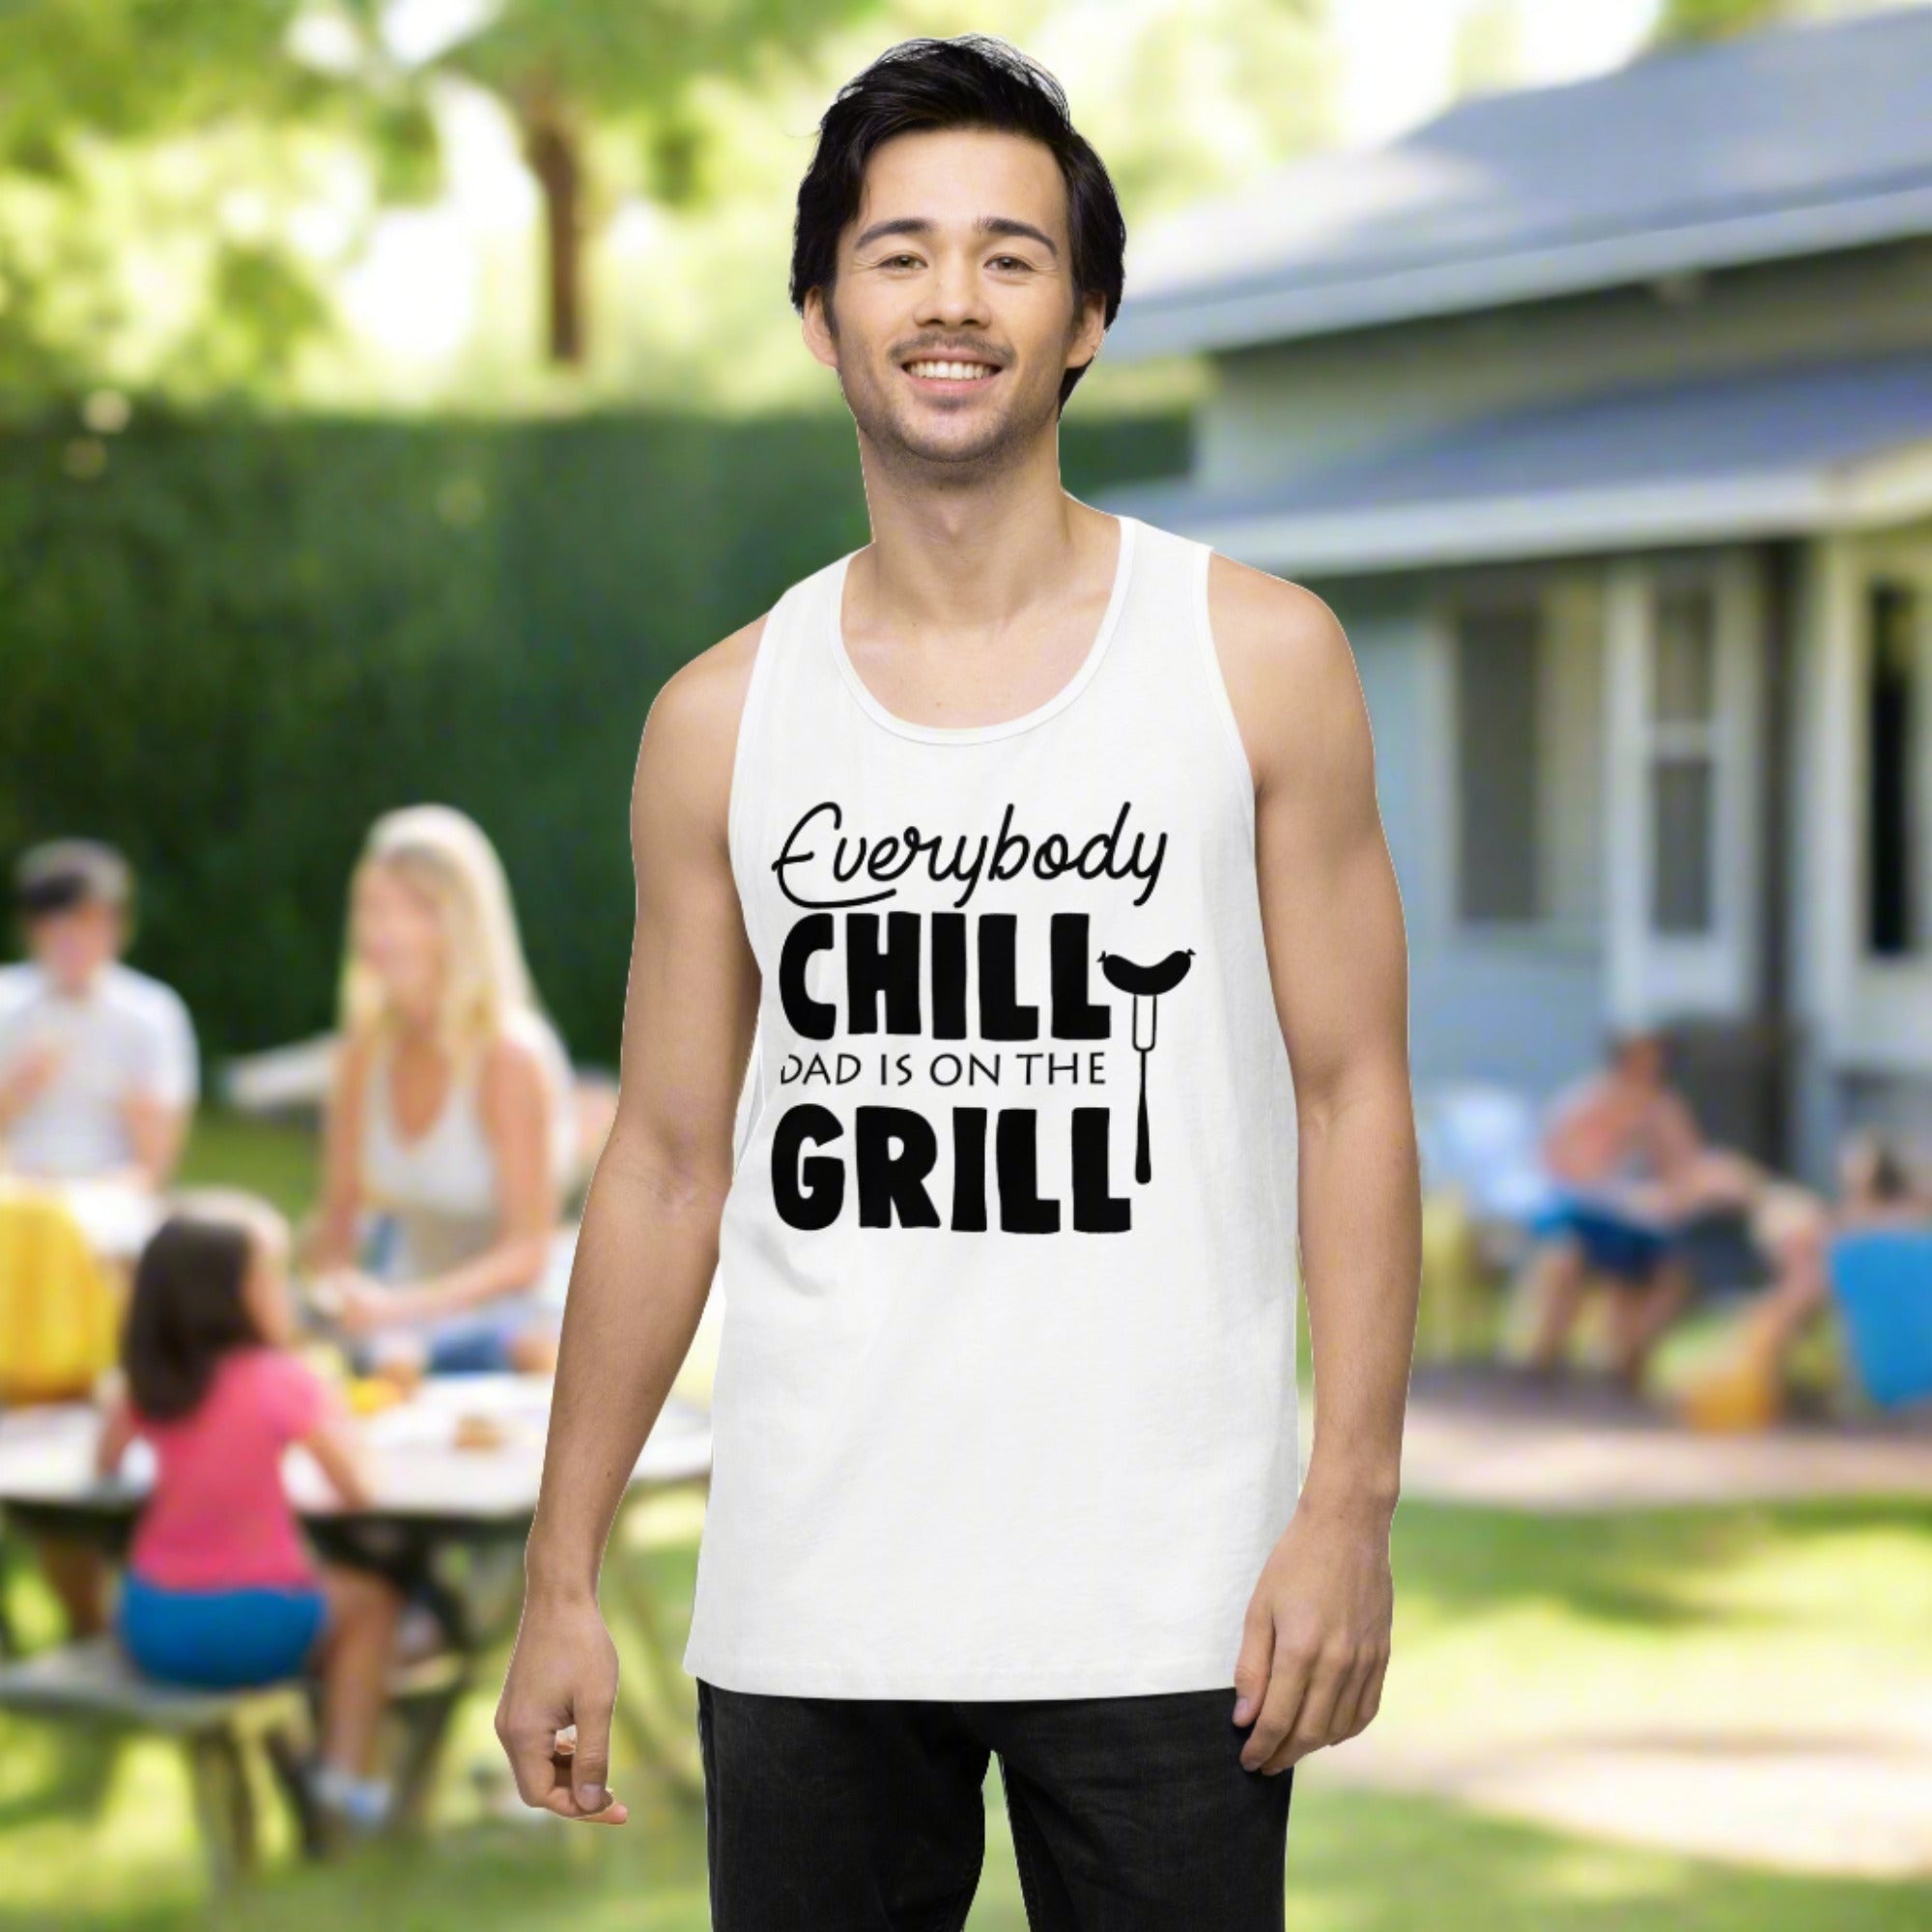 BBQ - Everybody Chill, Dad is On the Grill - Men’s premium tank top